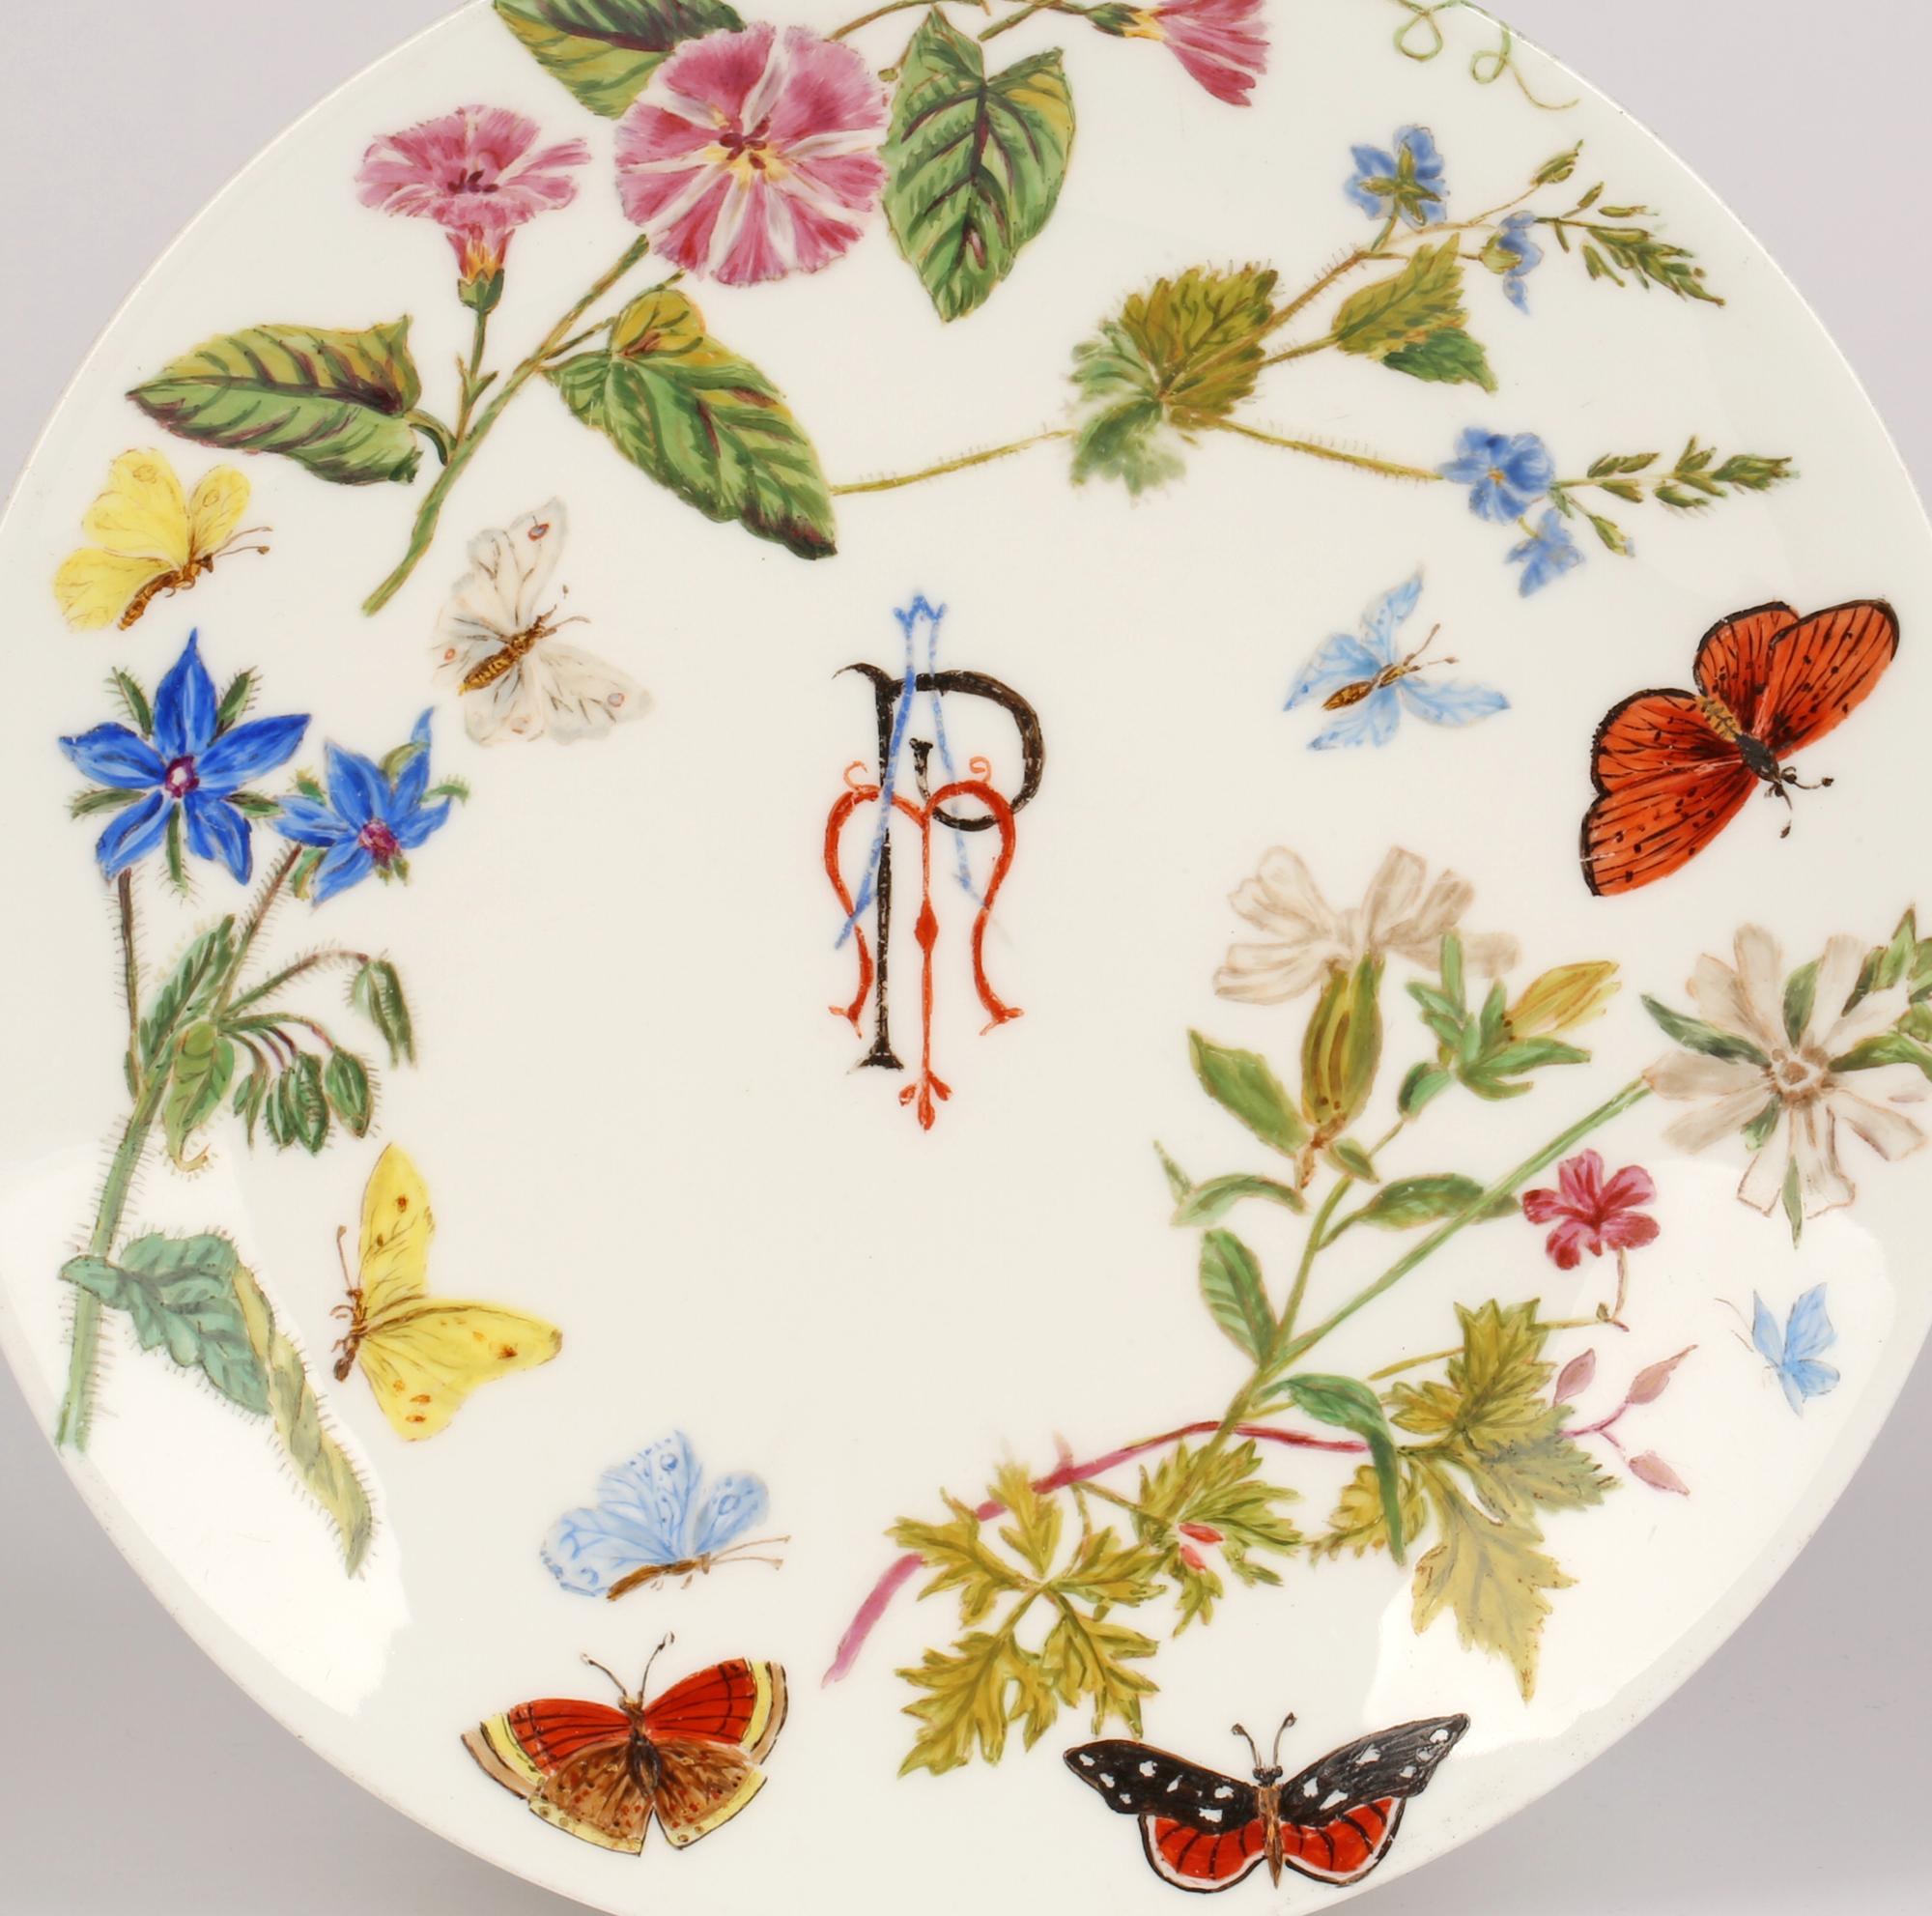 Minton Porcelain Hand-Painted Blank Cabinet Plate Signed AMB, 1890 For Sale 4